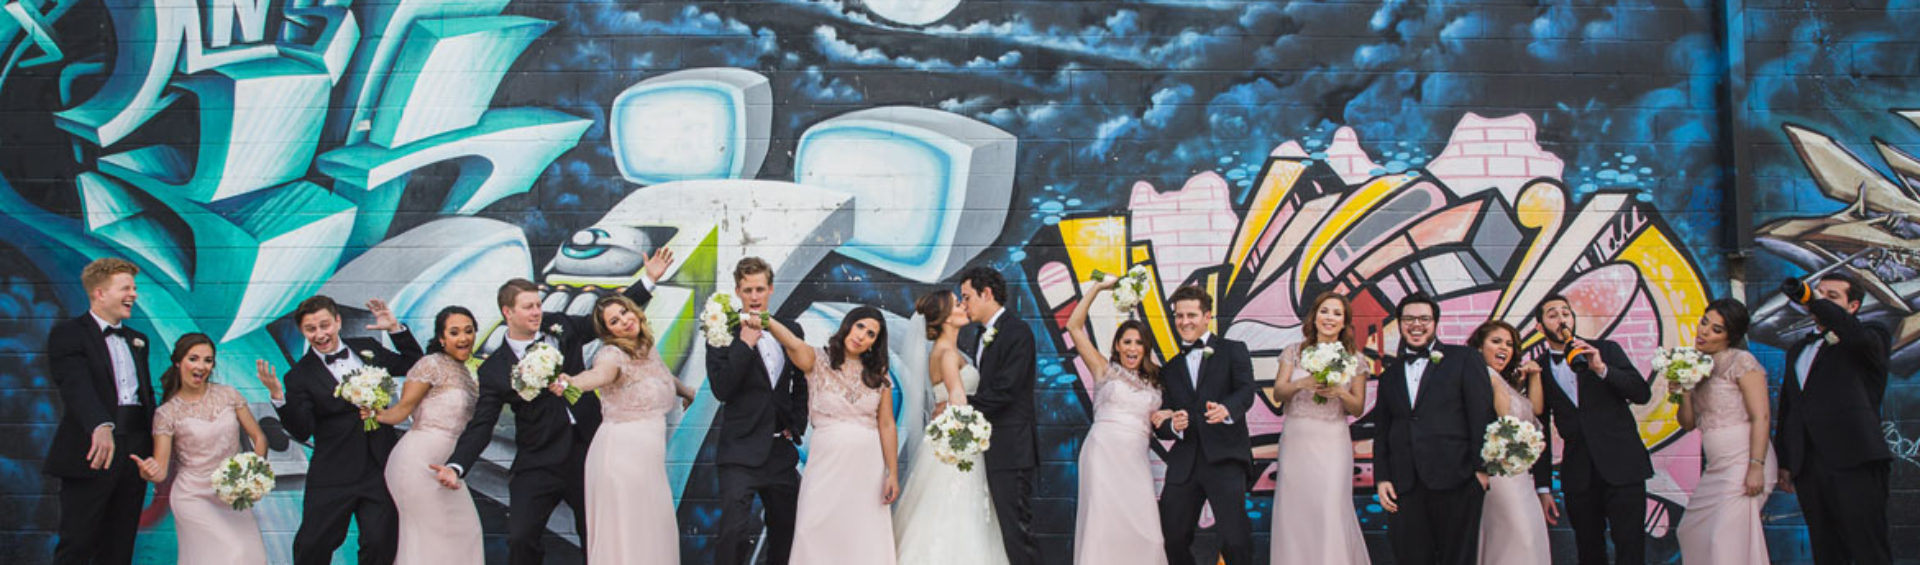 Nieto houston wedding party portrait at graffiti building wall by steve lee photography